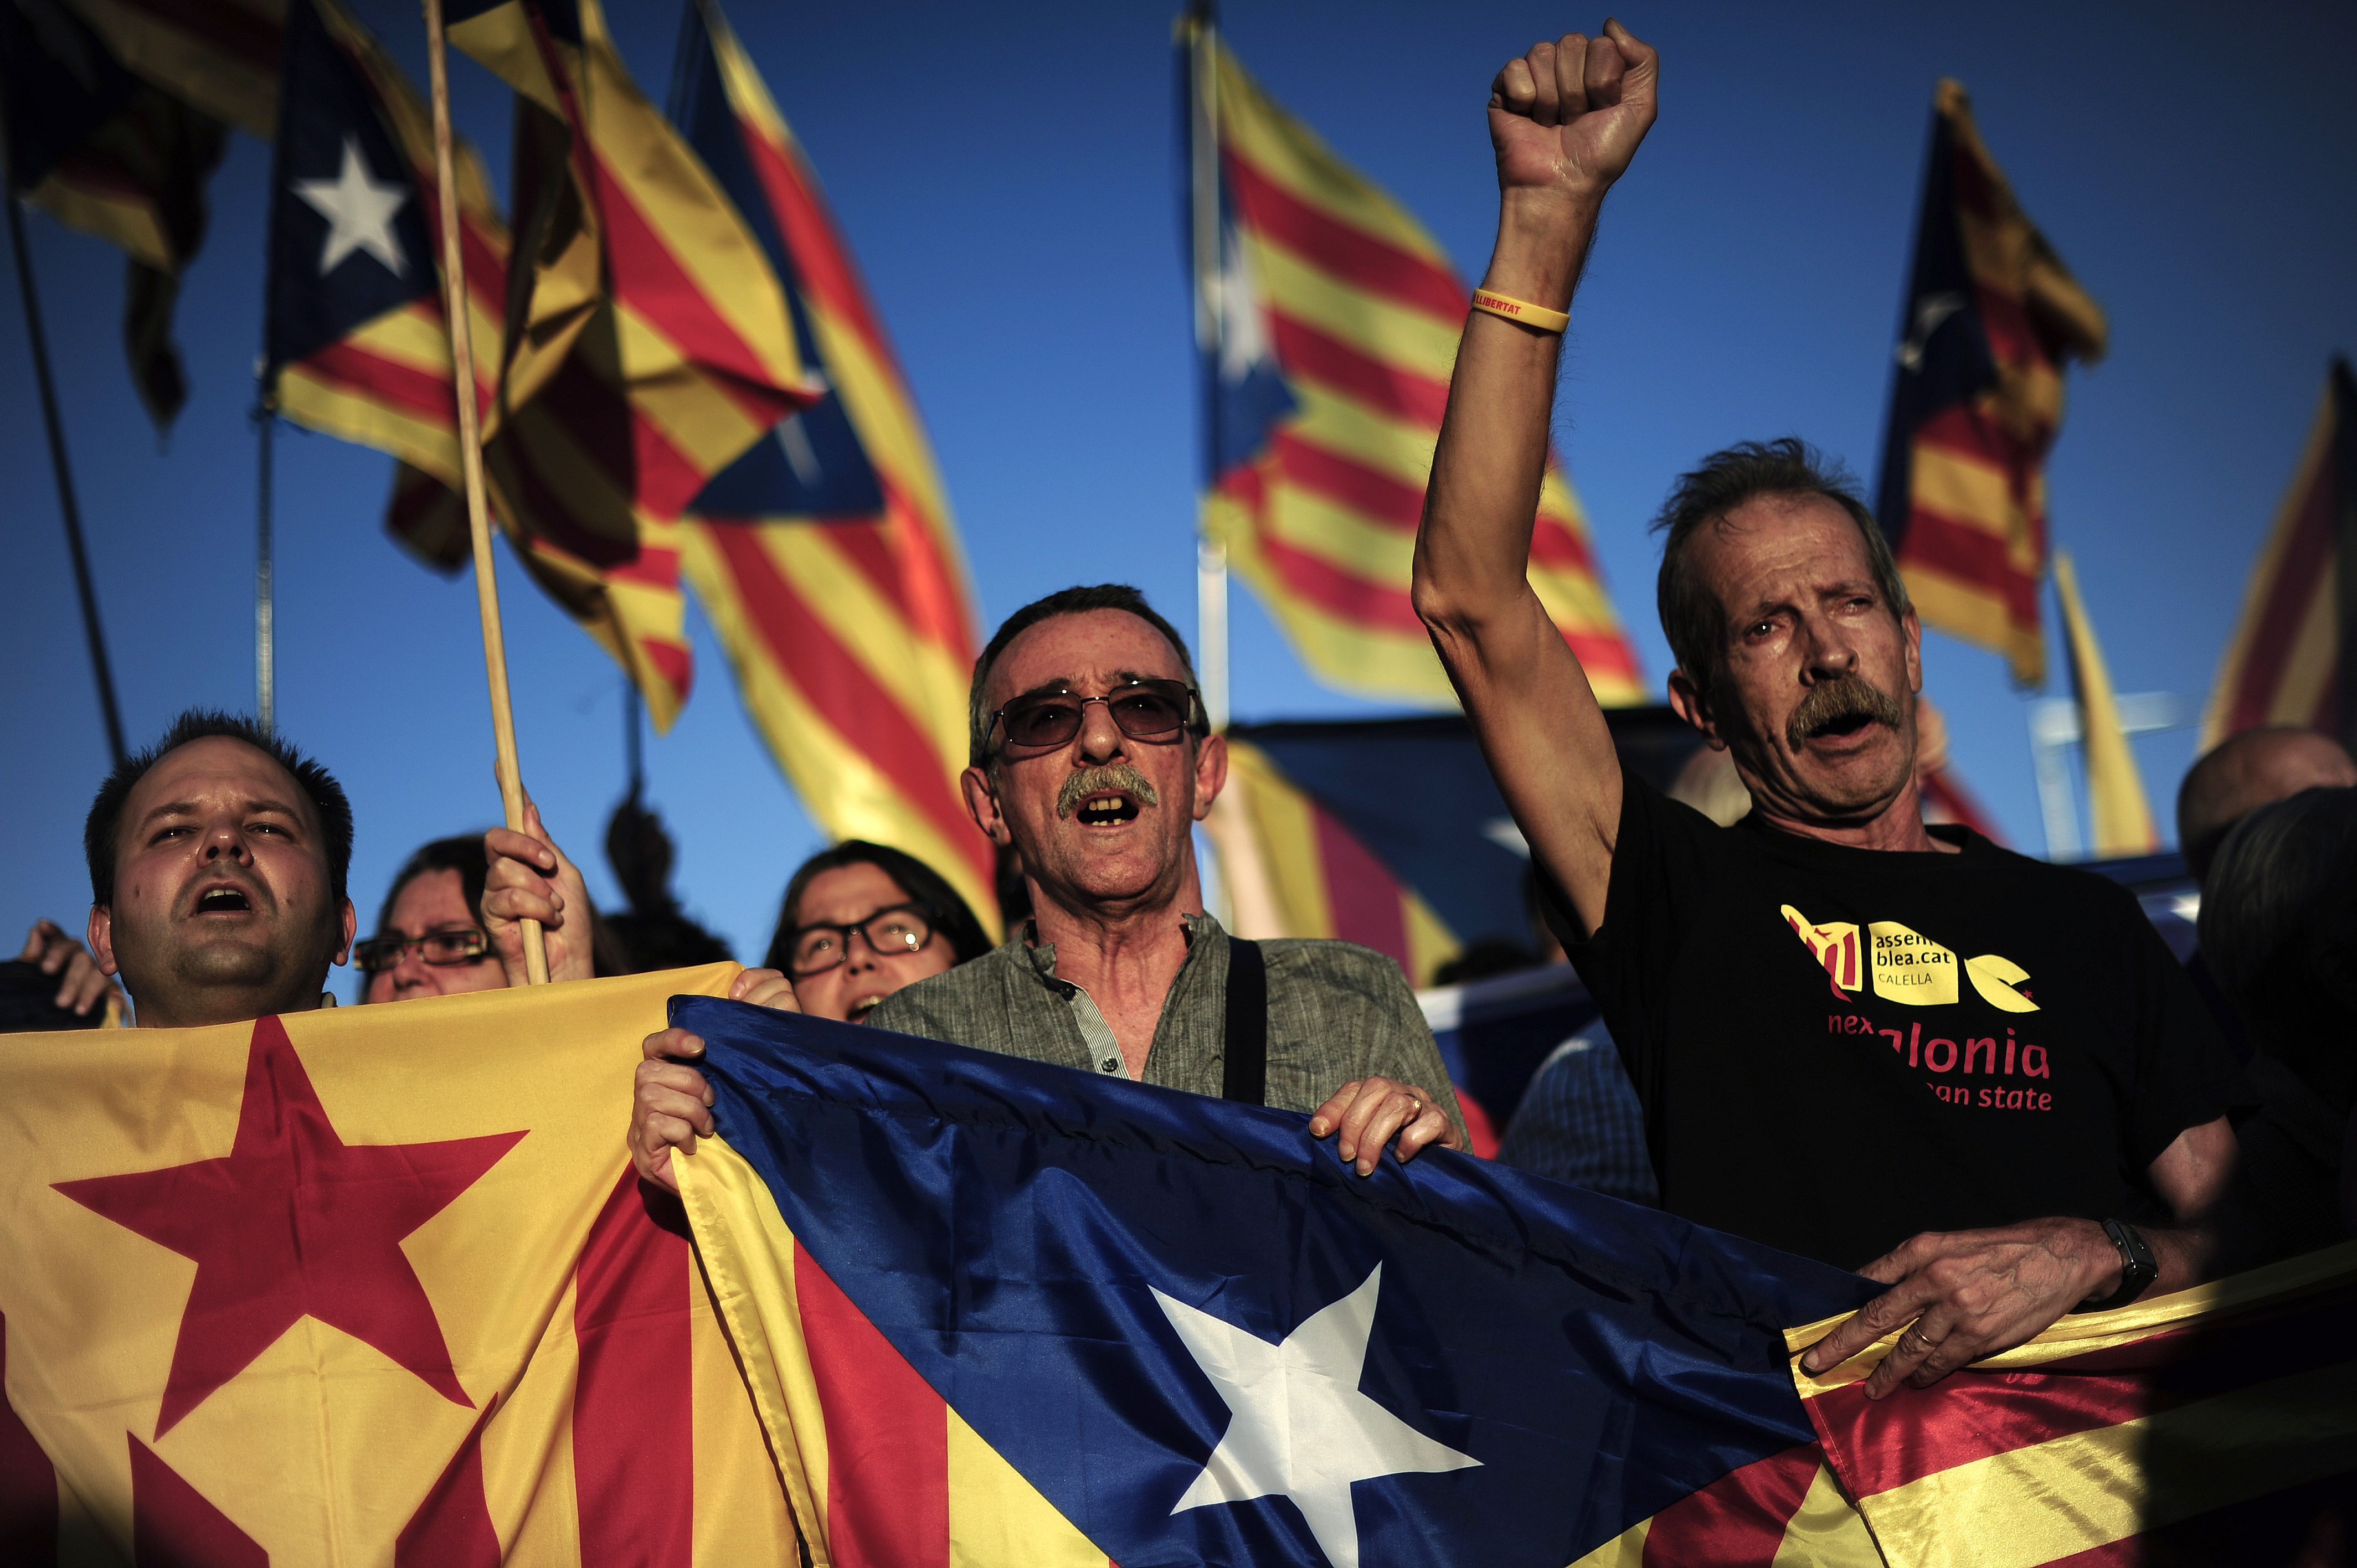 Demonstratorshold Catalan flags during a protest calling for independence from Spain in Barcelona,  October 2013. (JOSEP LAGO&mdash;AFP/Getty Images)